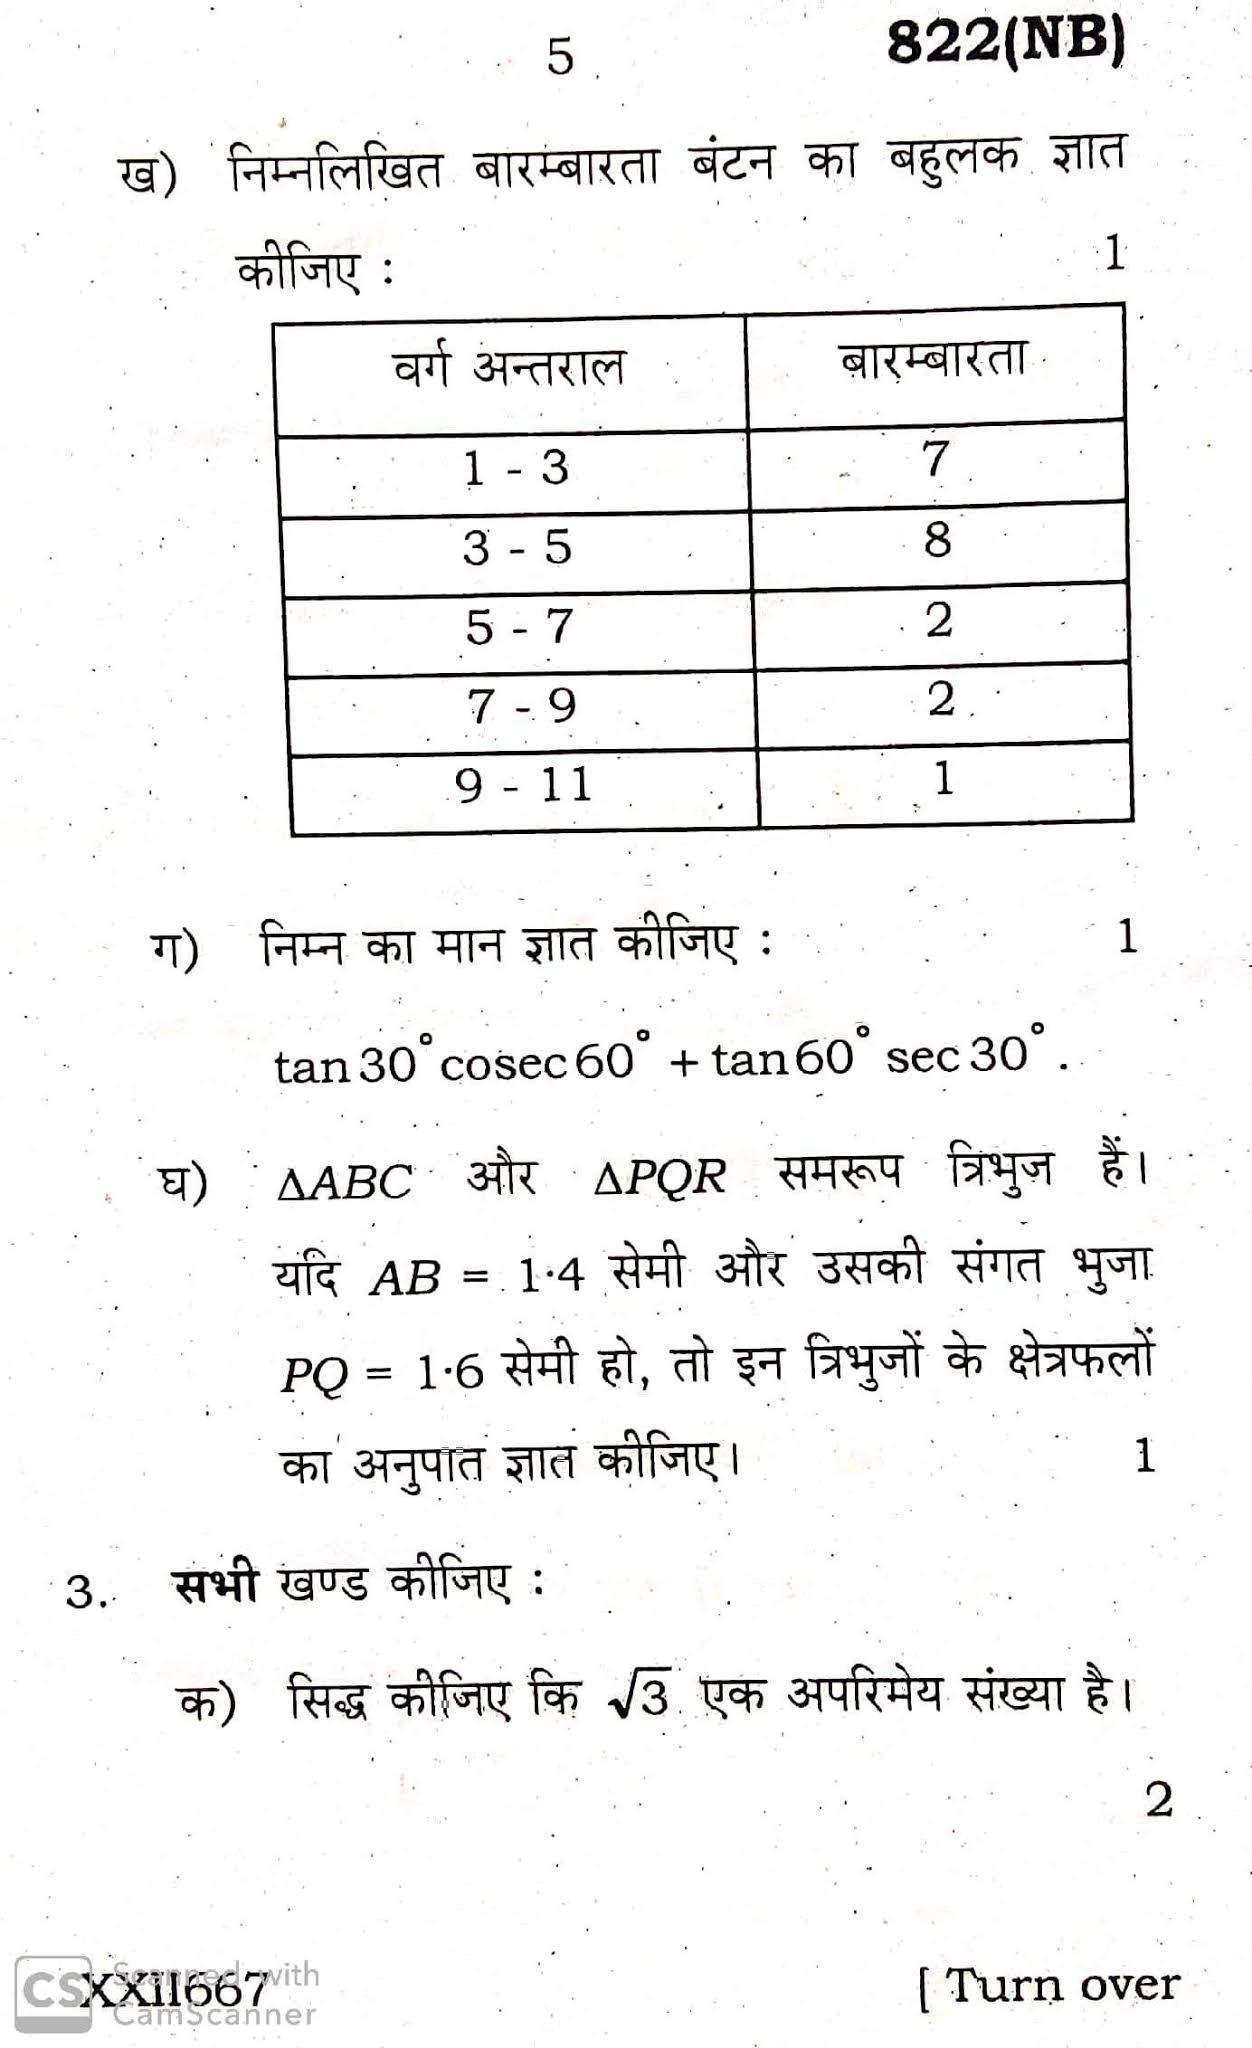 Mathematics, UP Board Question paper for 10th (High school), 2020 Examination